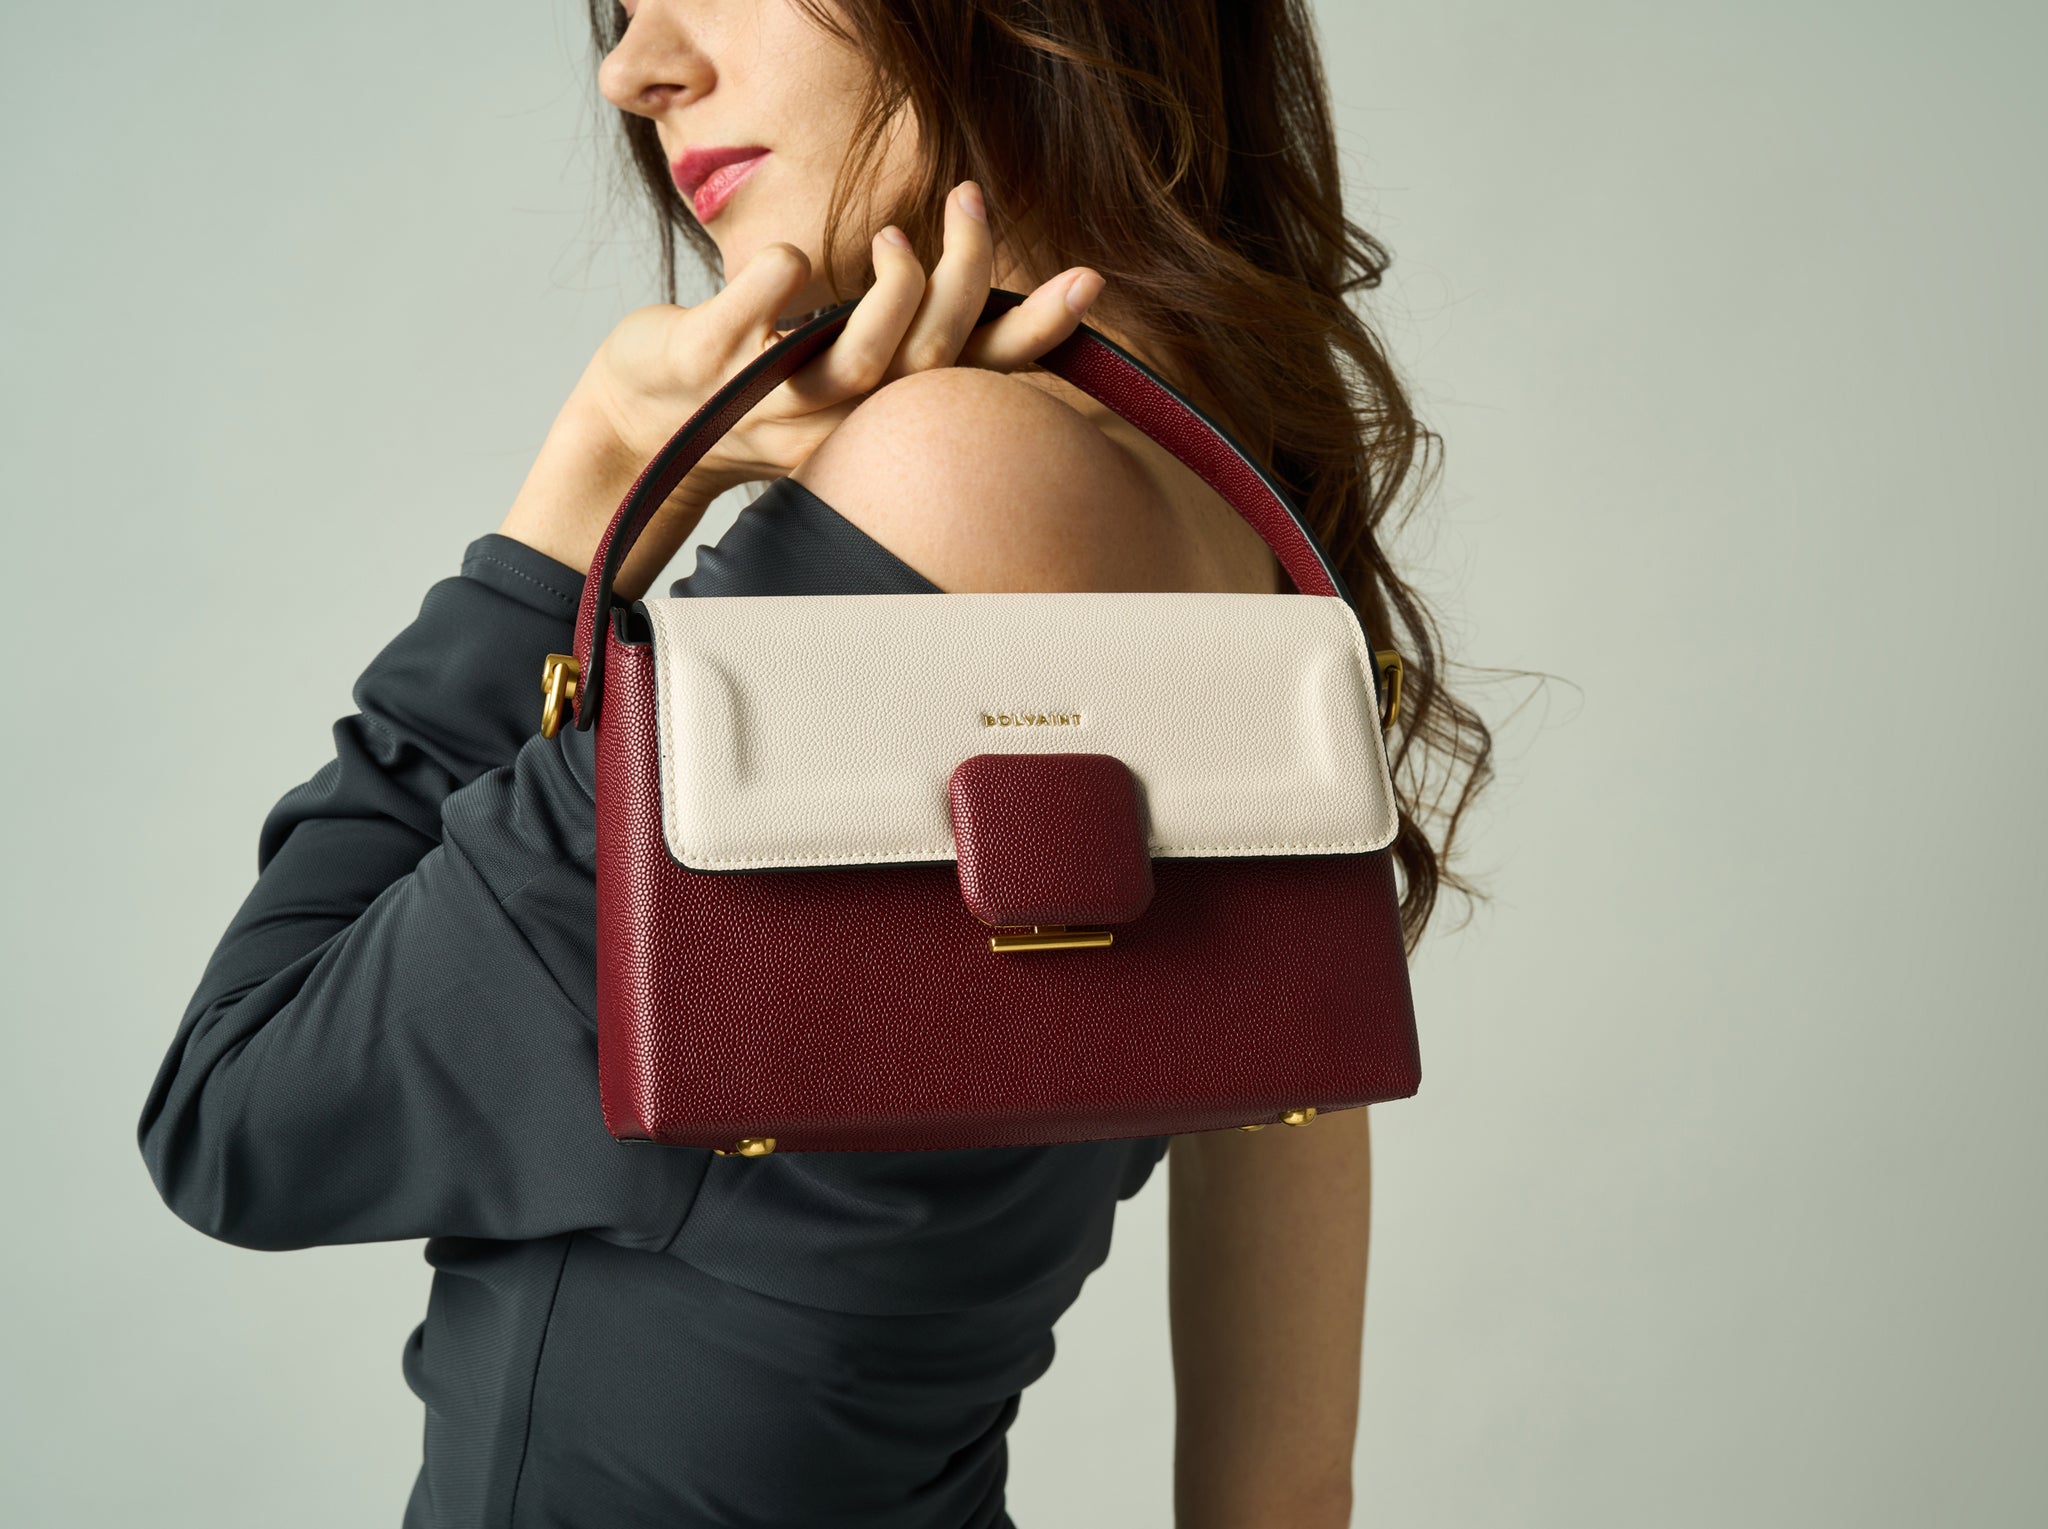 Bolvaint - The Marianne Clutch